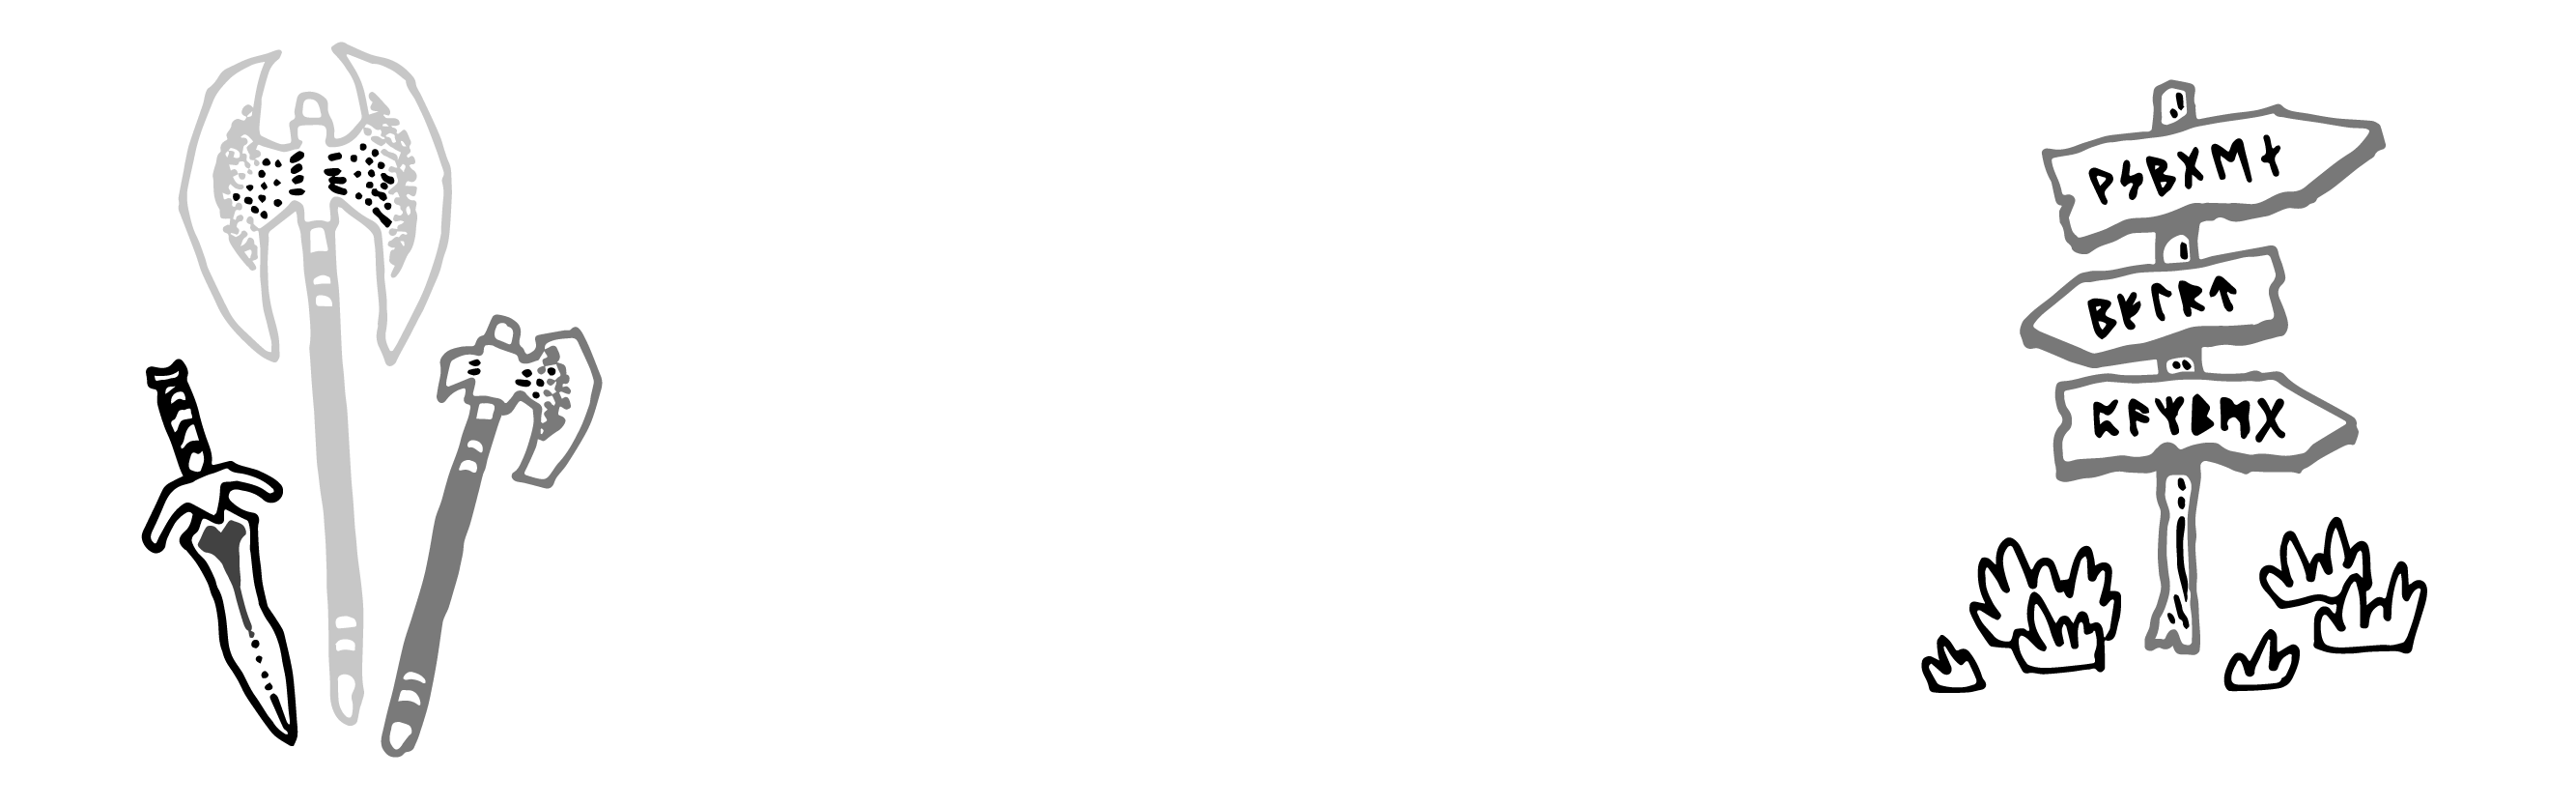 For Moria! first draft